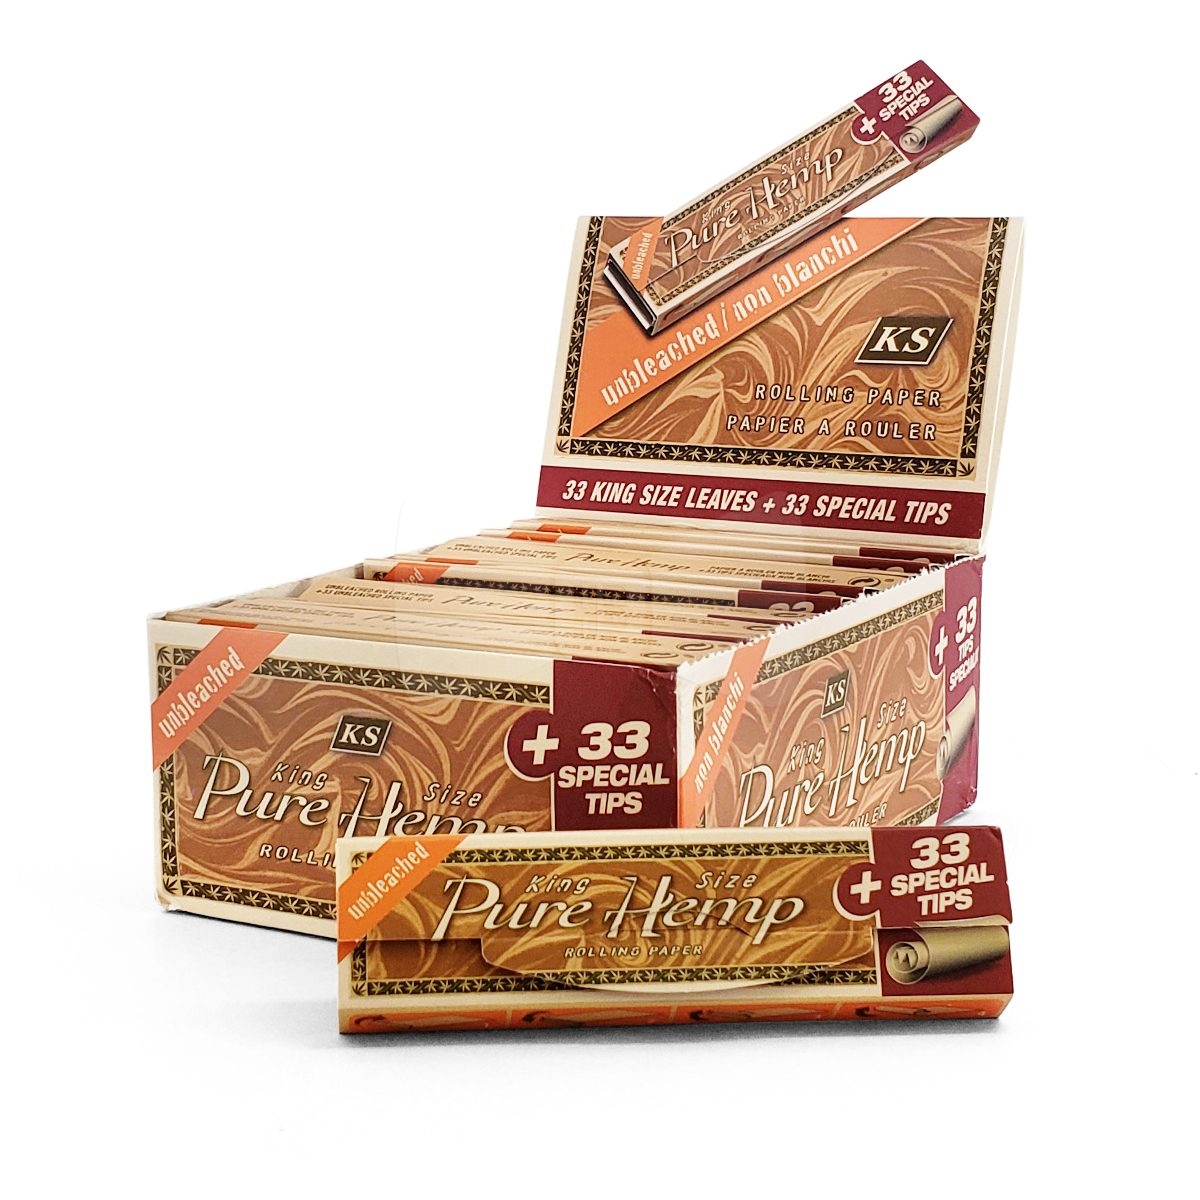 Pure Hemp Unbleached King Size with Tips Full Box (24 Packs)